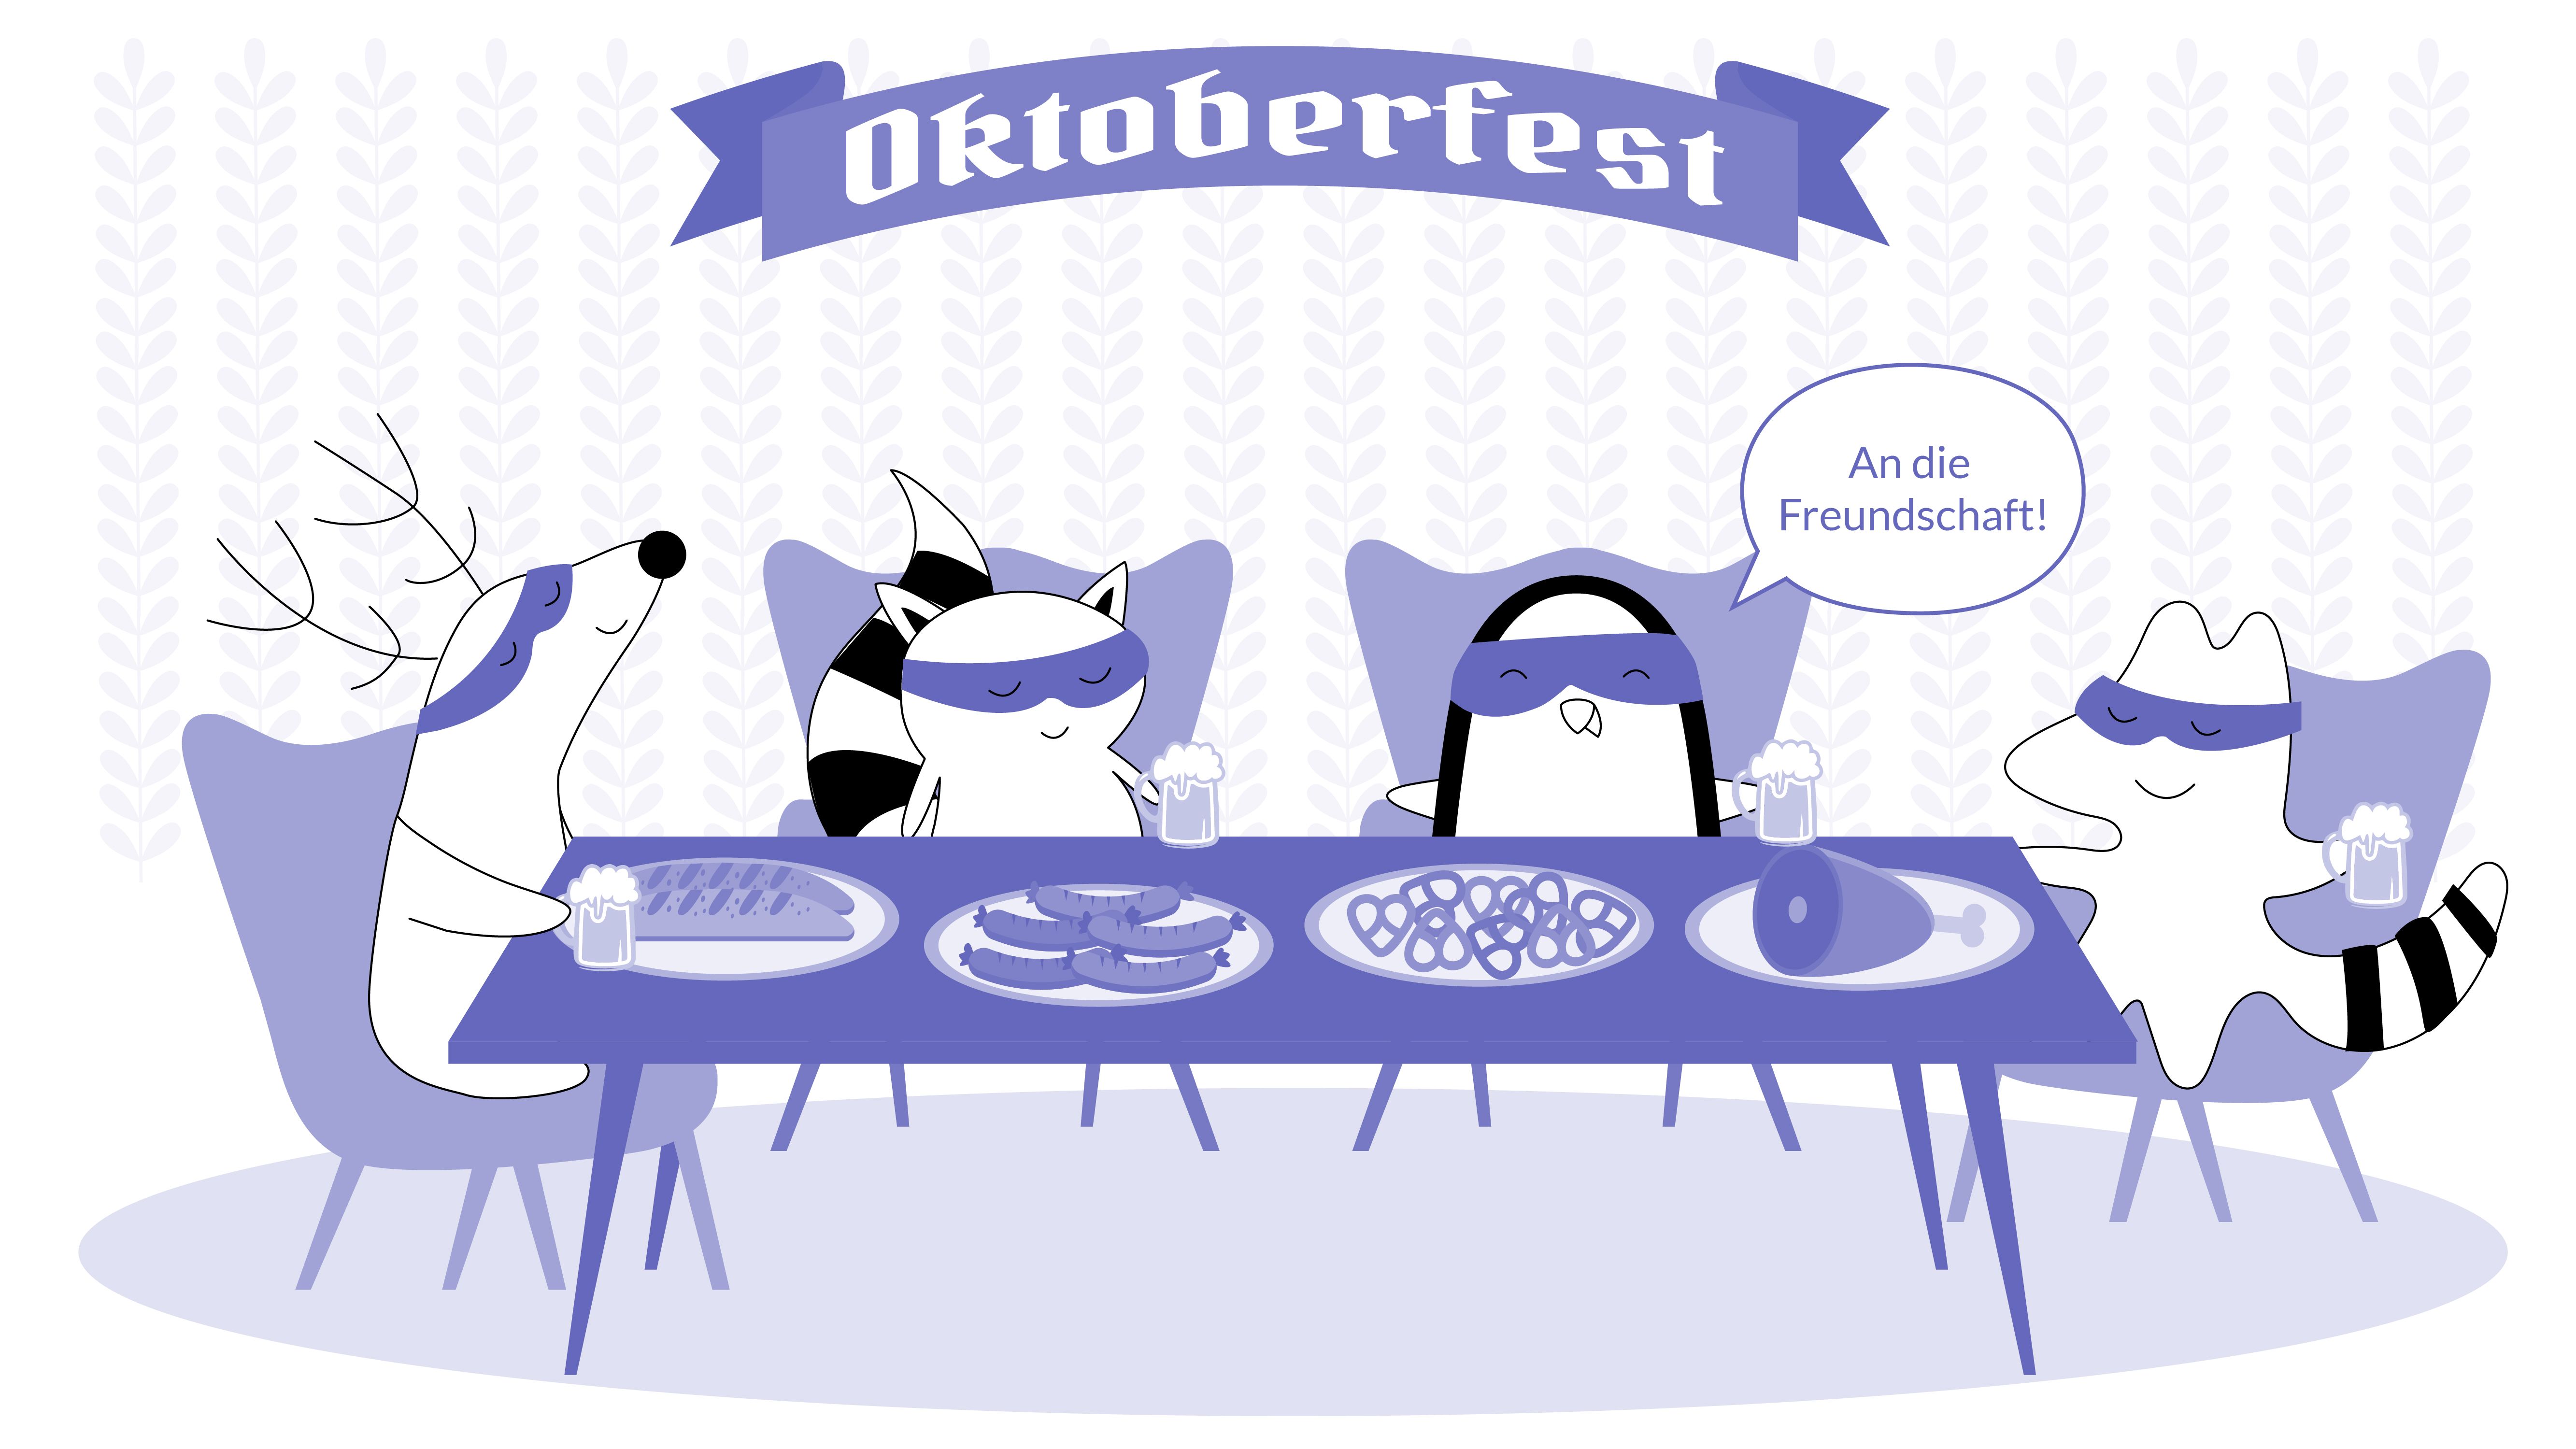 Soren, Iggy, Pocky, and Benji are still at Oktoberfest, they’re drinking beers at the table, Benji toasts to their friendship, saying, “An die Freundschaft!”